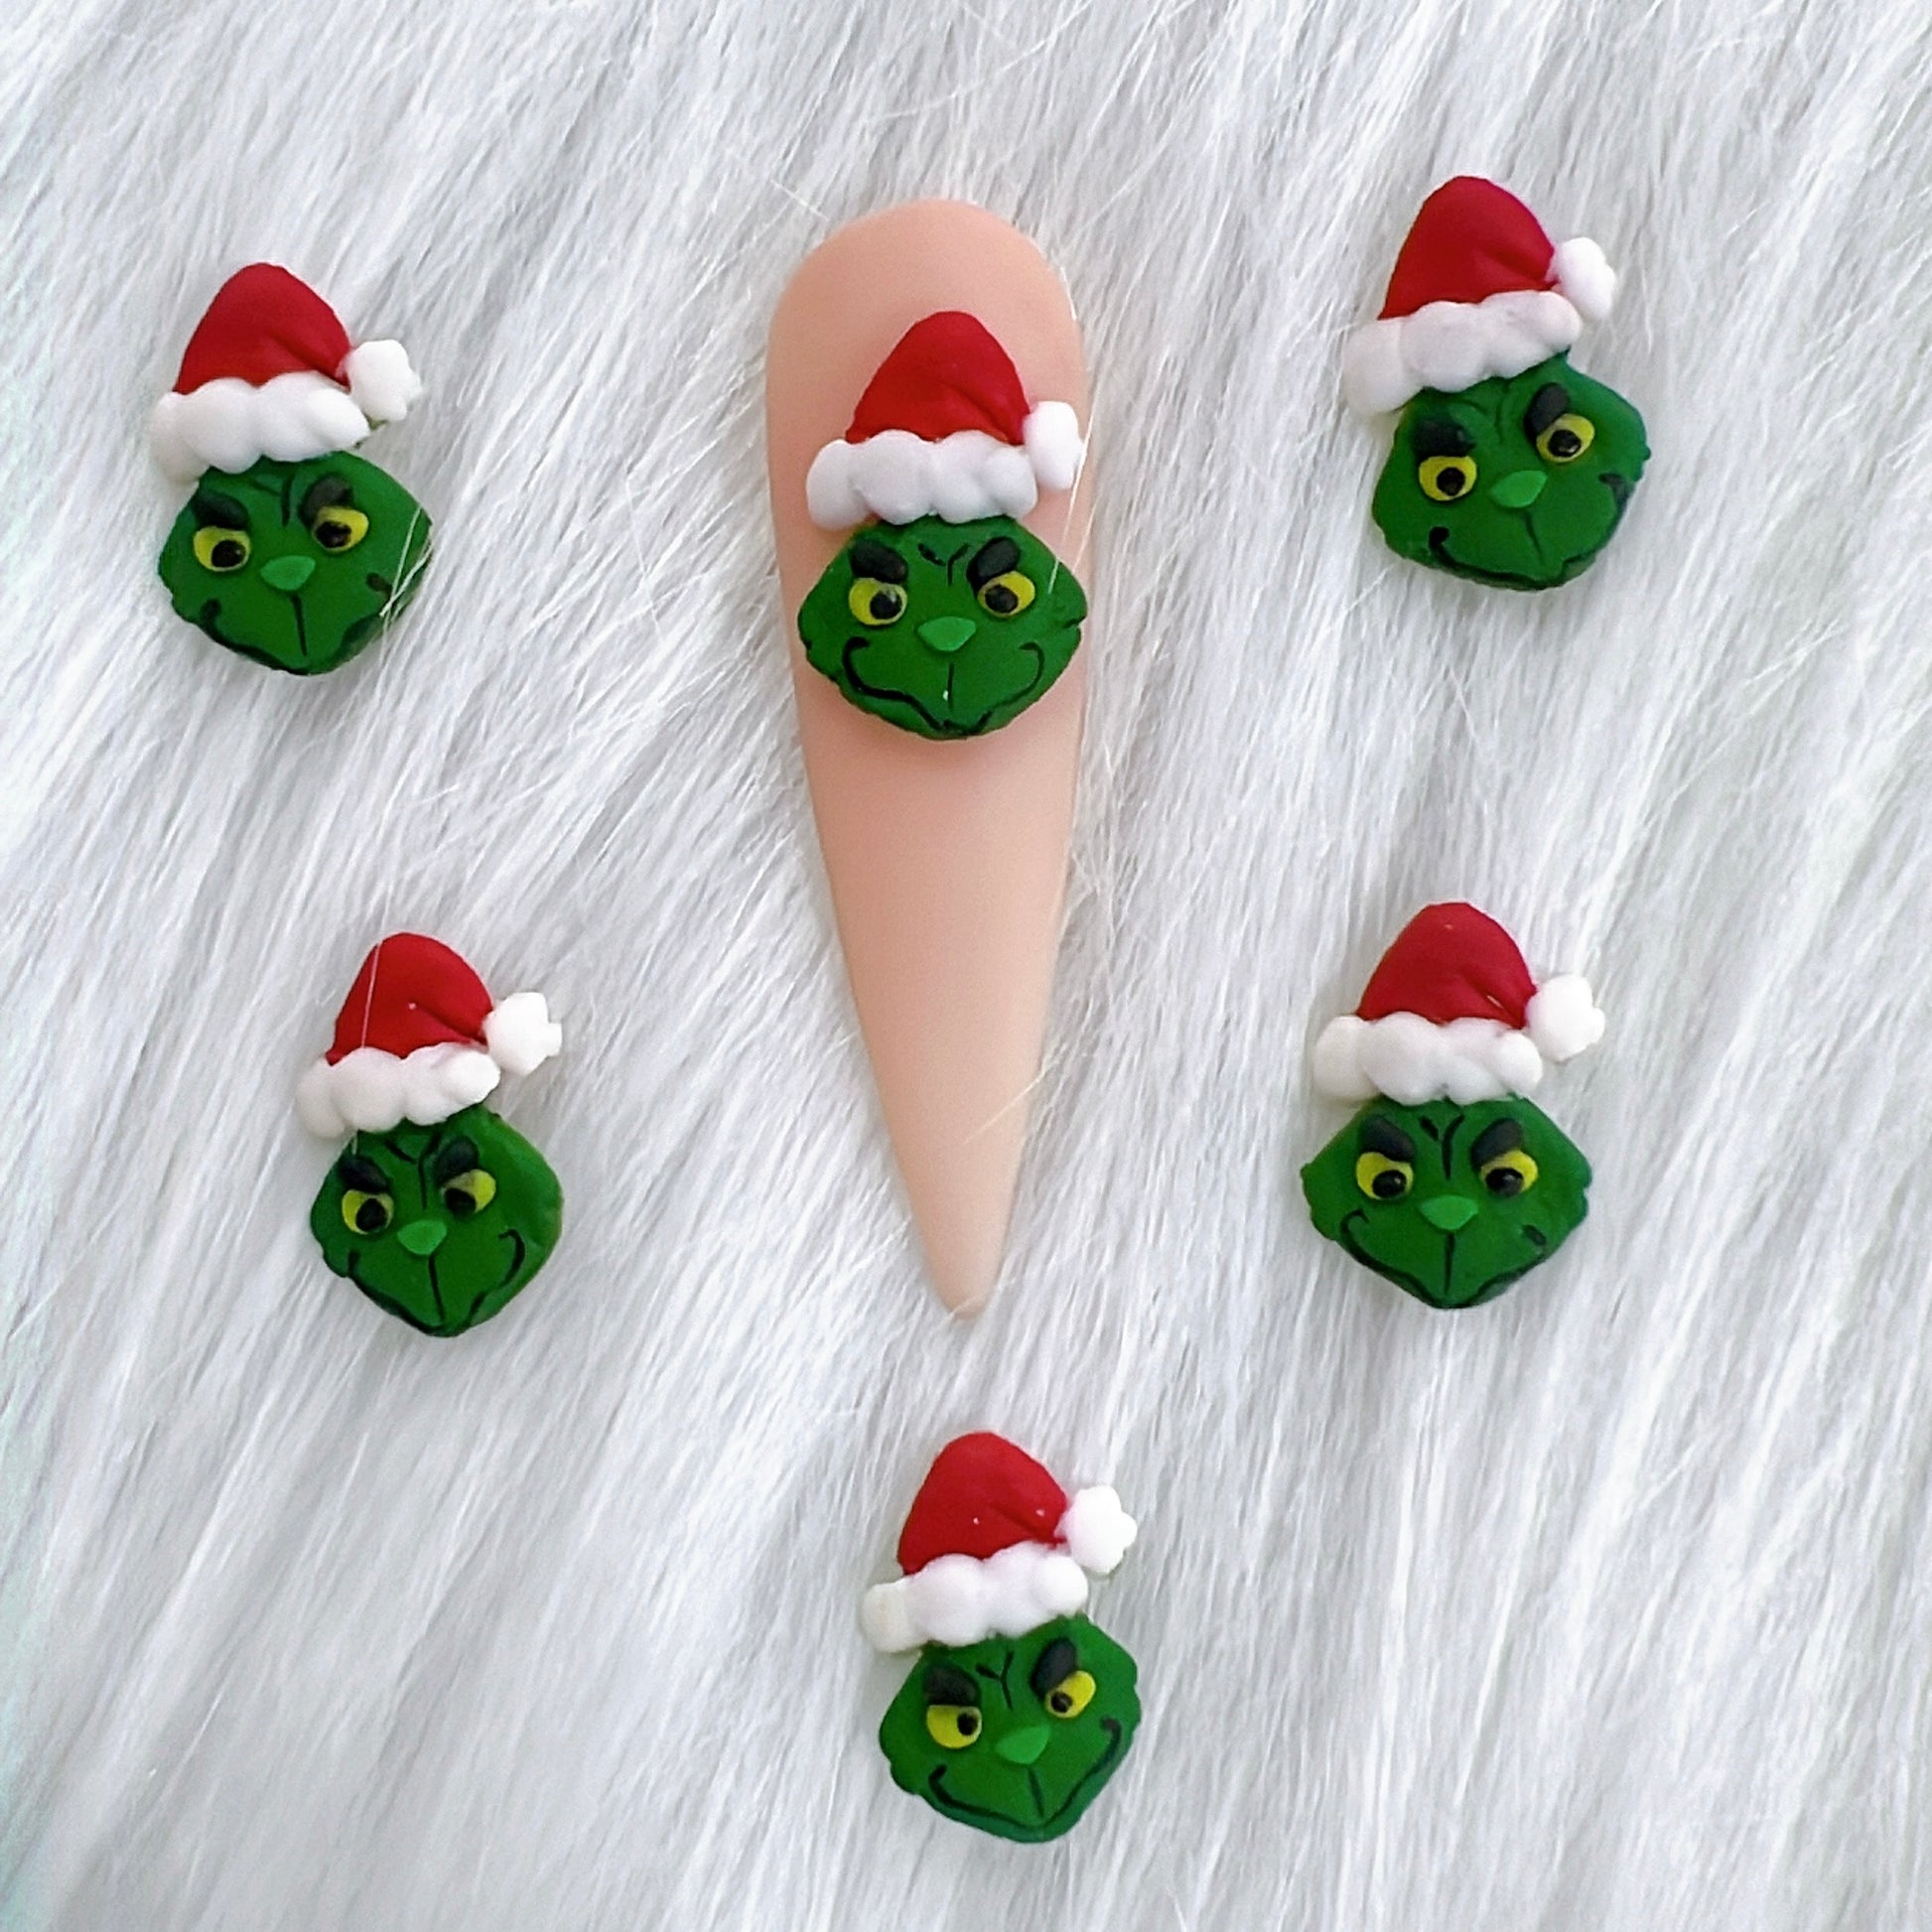 4pcs The Grinch 3D Acrylic Charms for Christmas. A unique designed charms for Christmas season Nail Fashion